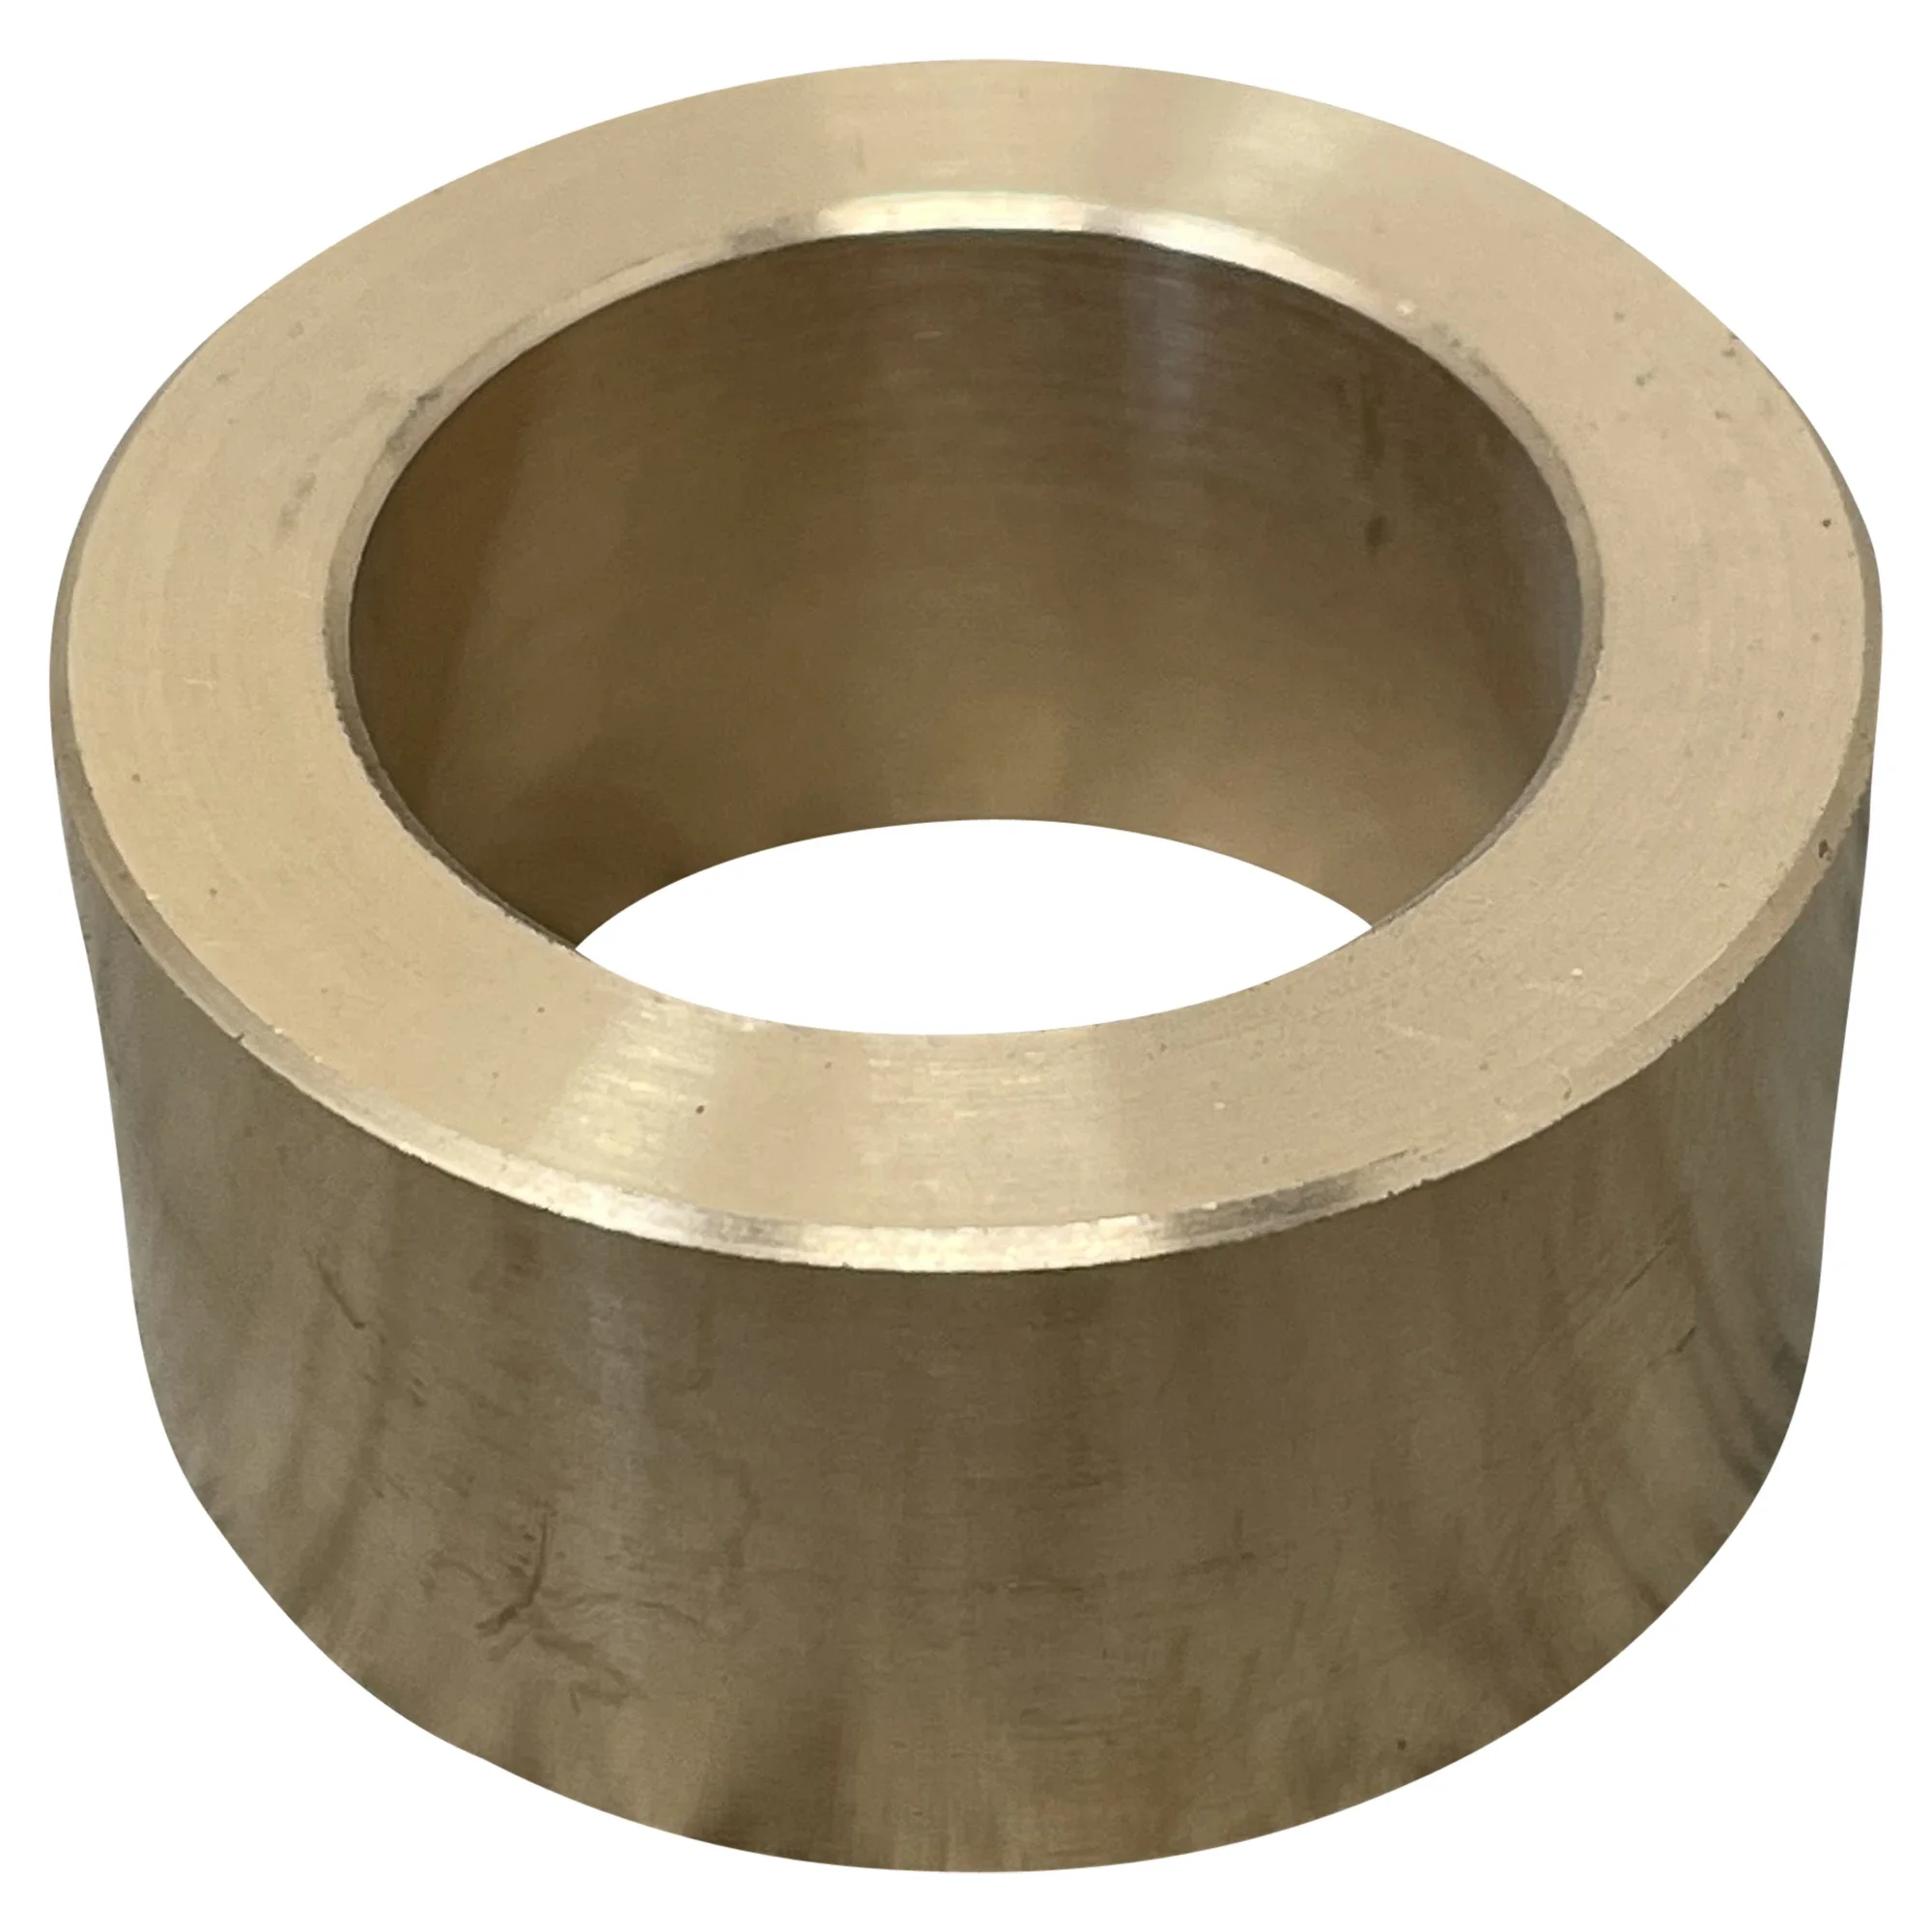 Wastebuilt® Replacement for Labrie Gripper Link Bushing